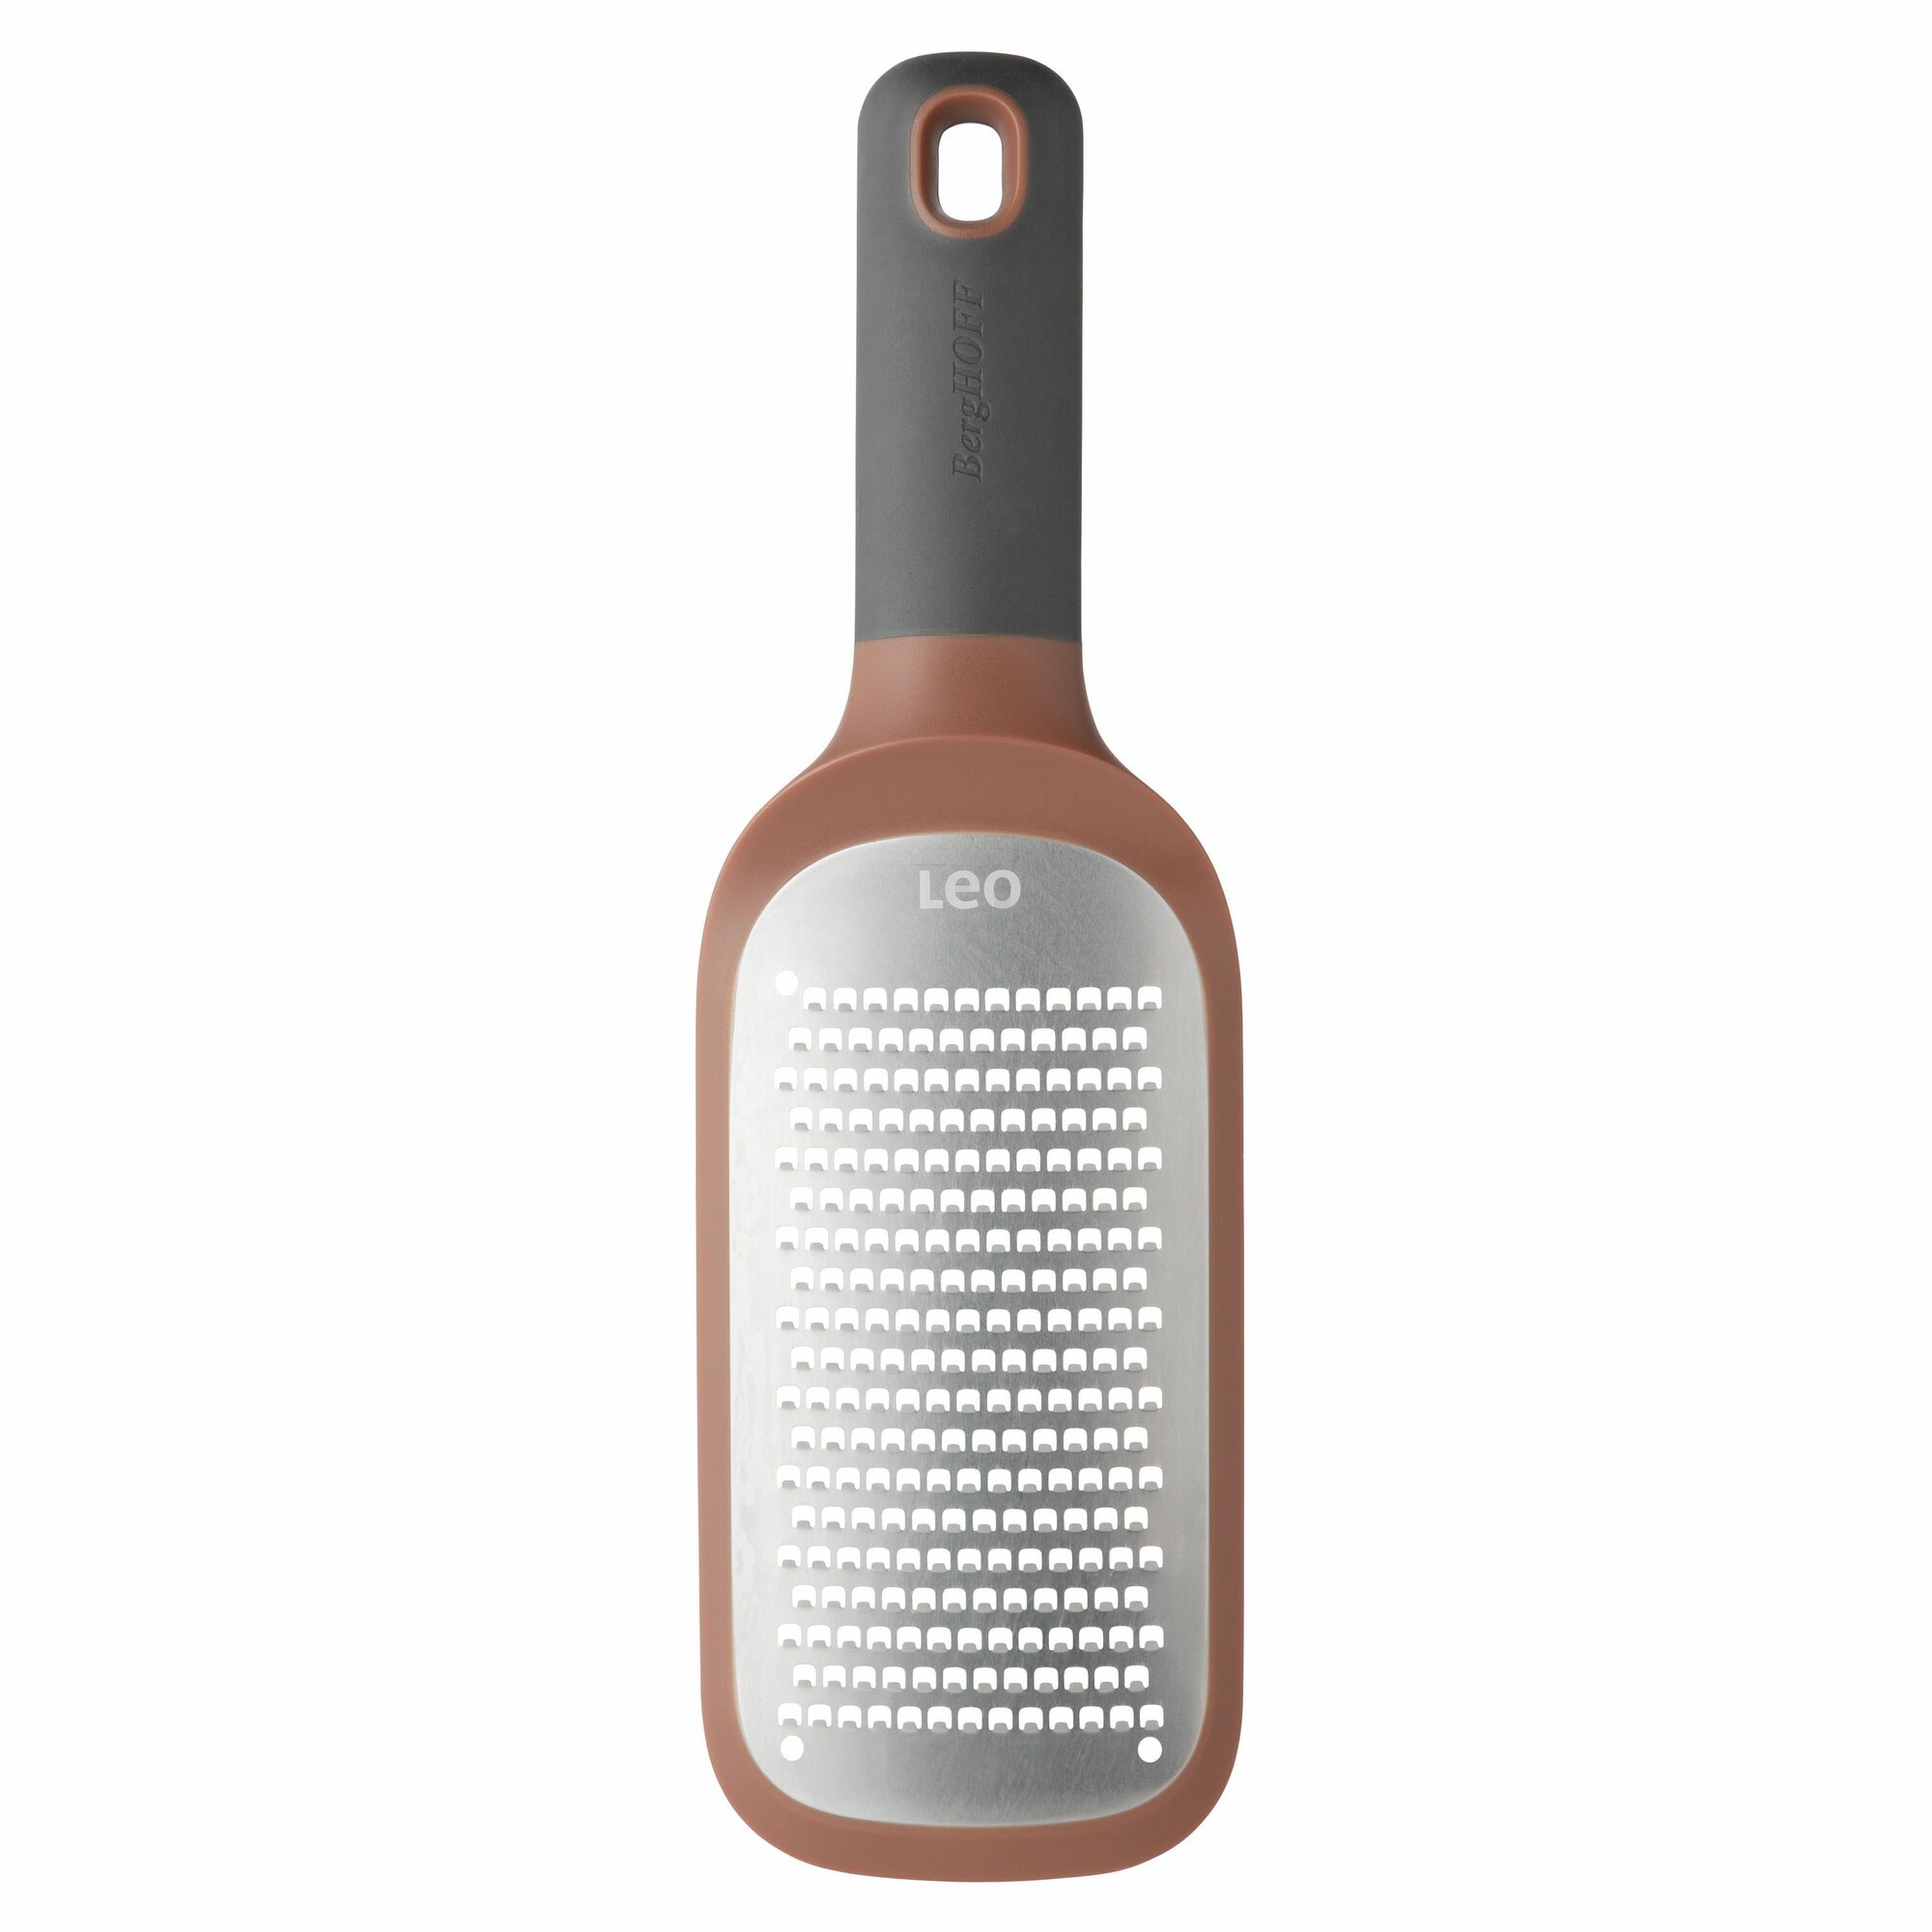 Microplane Extra Coarse Mixing Bowl Grater